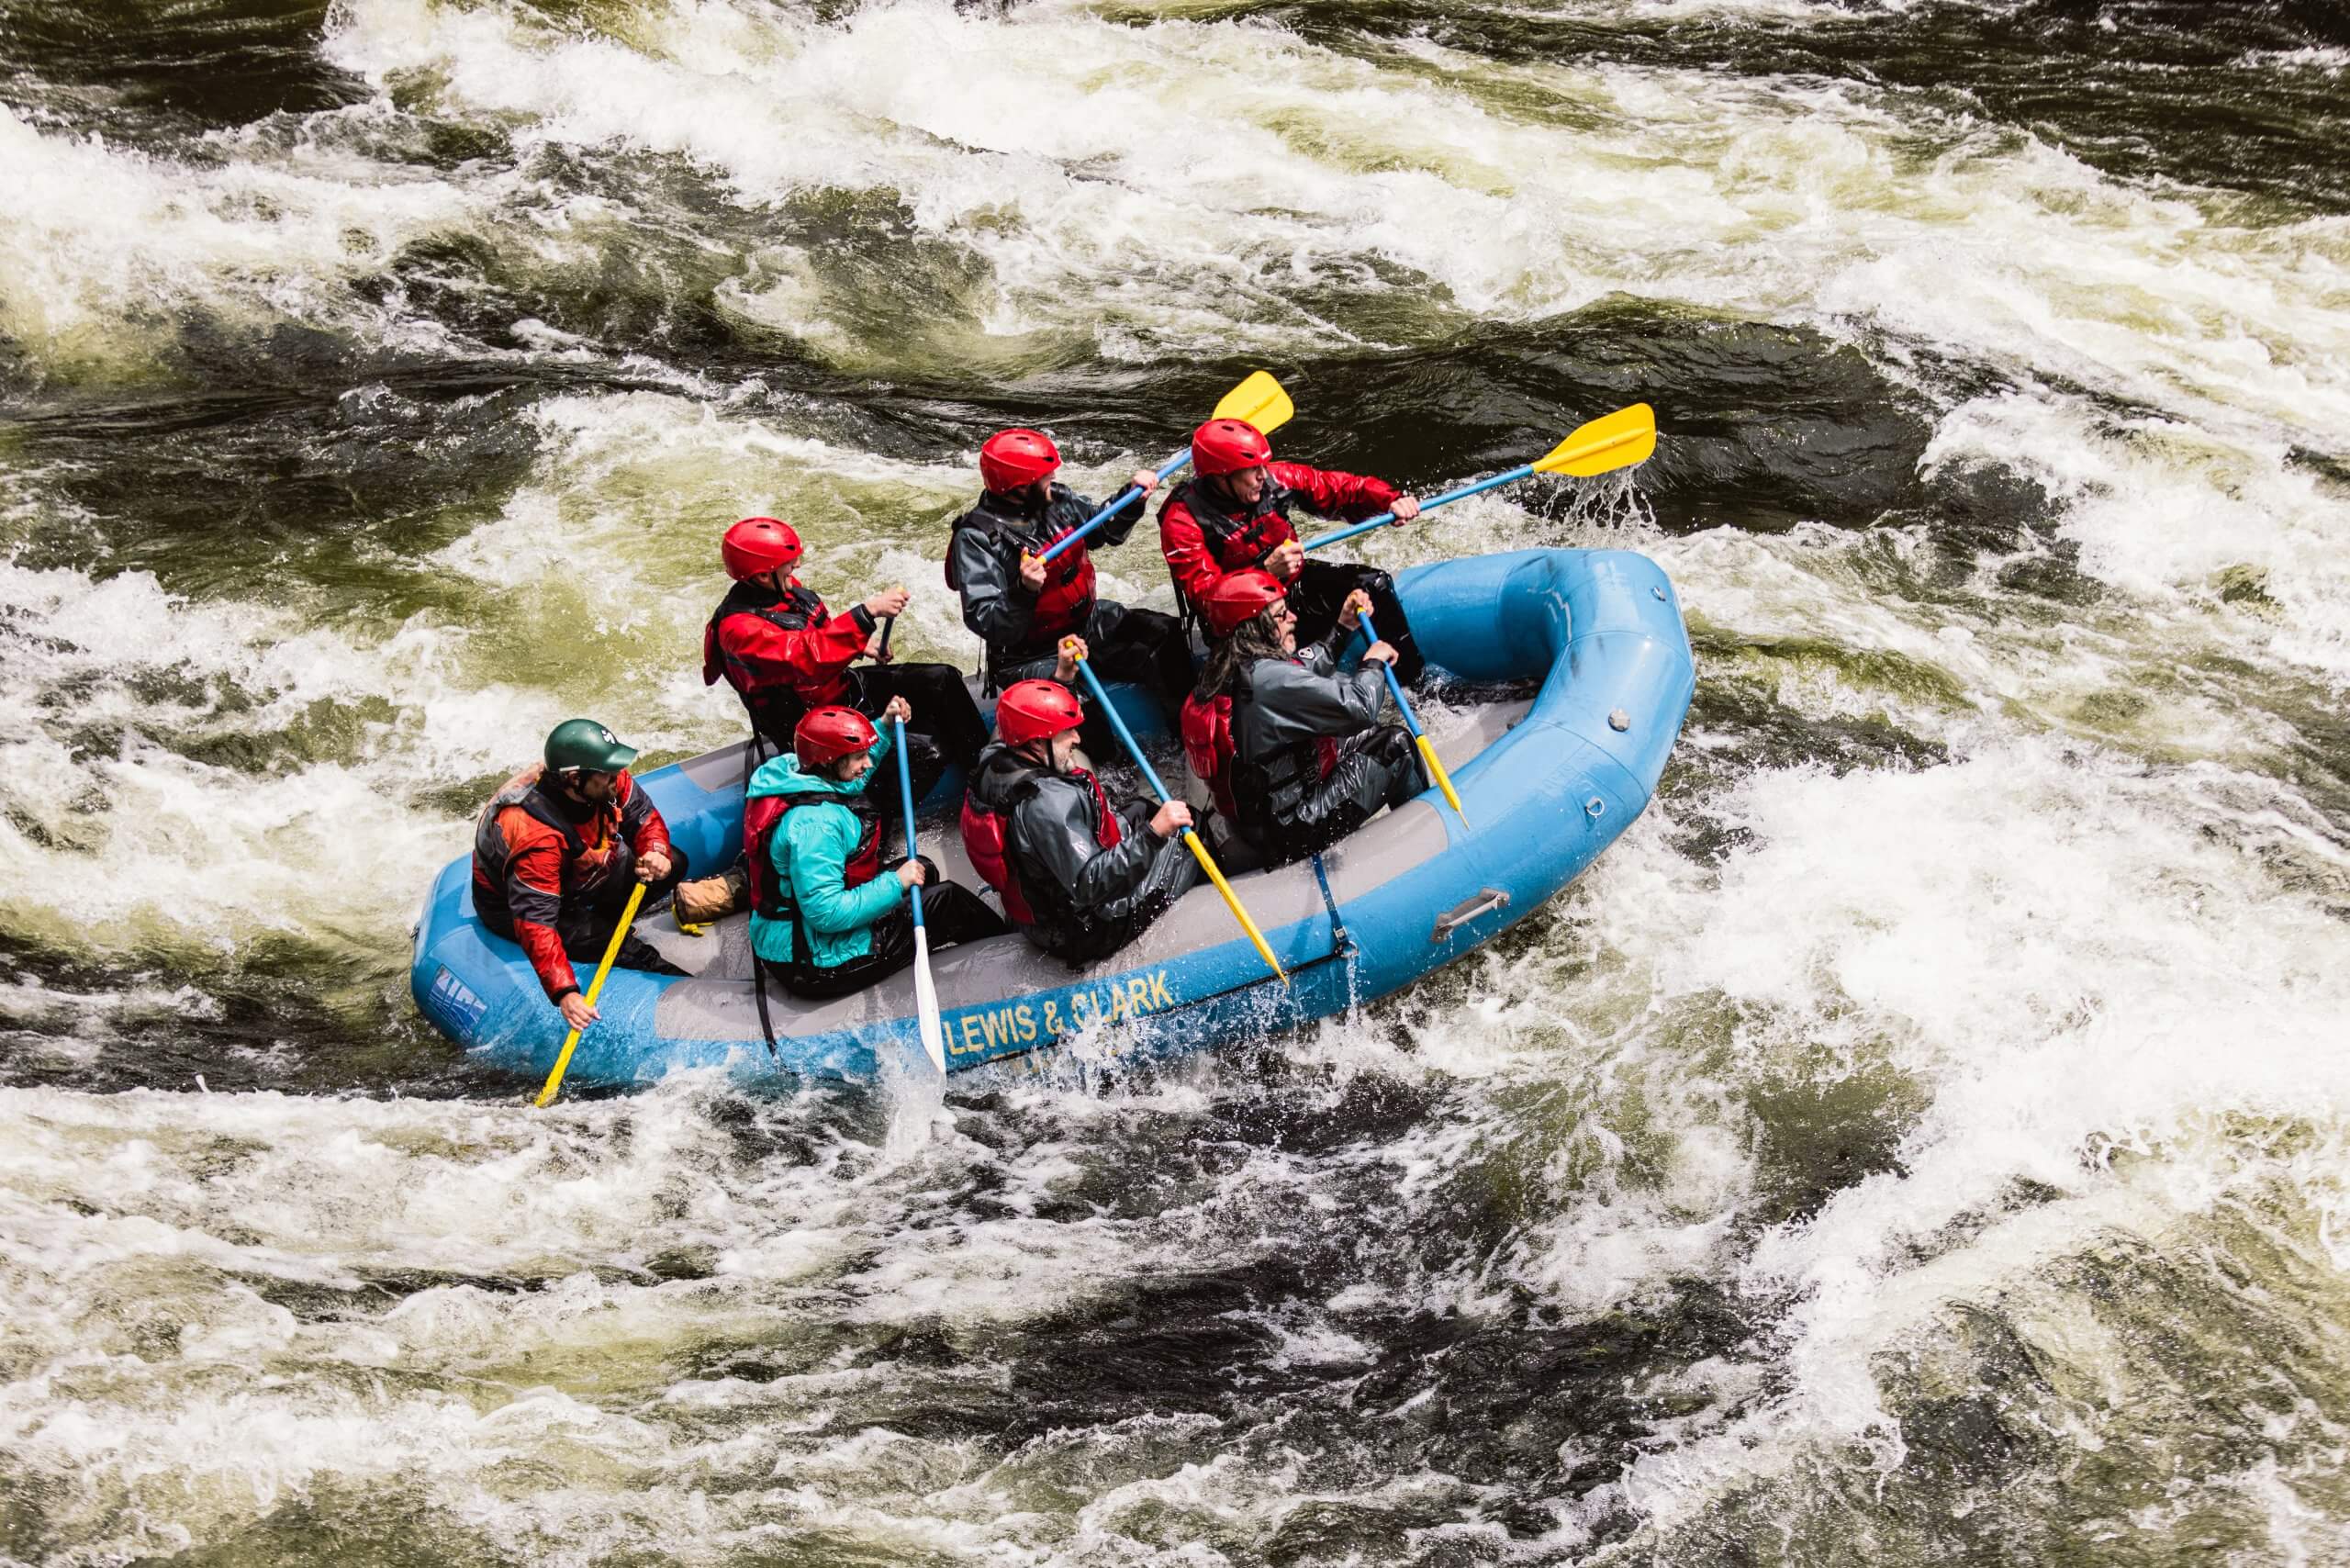 Seven people with red helmets sit in a blue raft for whitewater rafting.